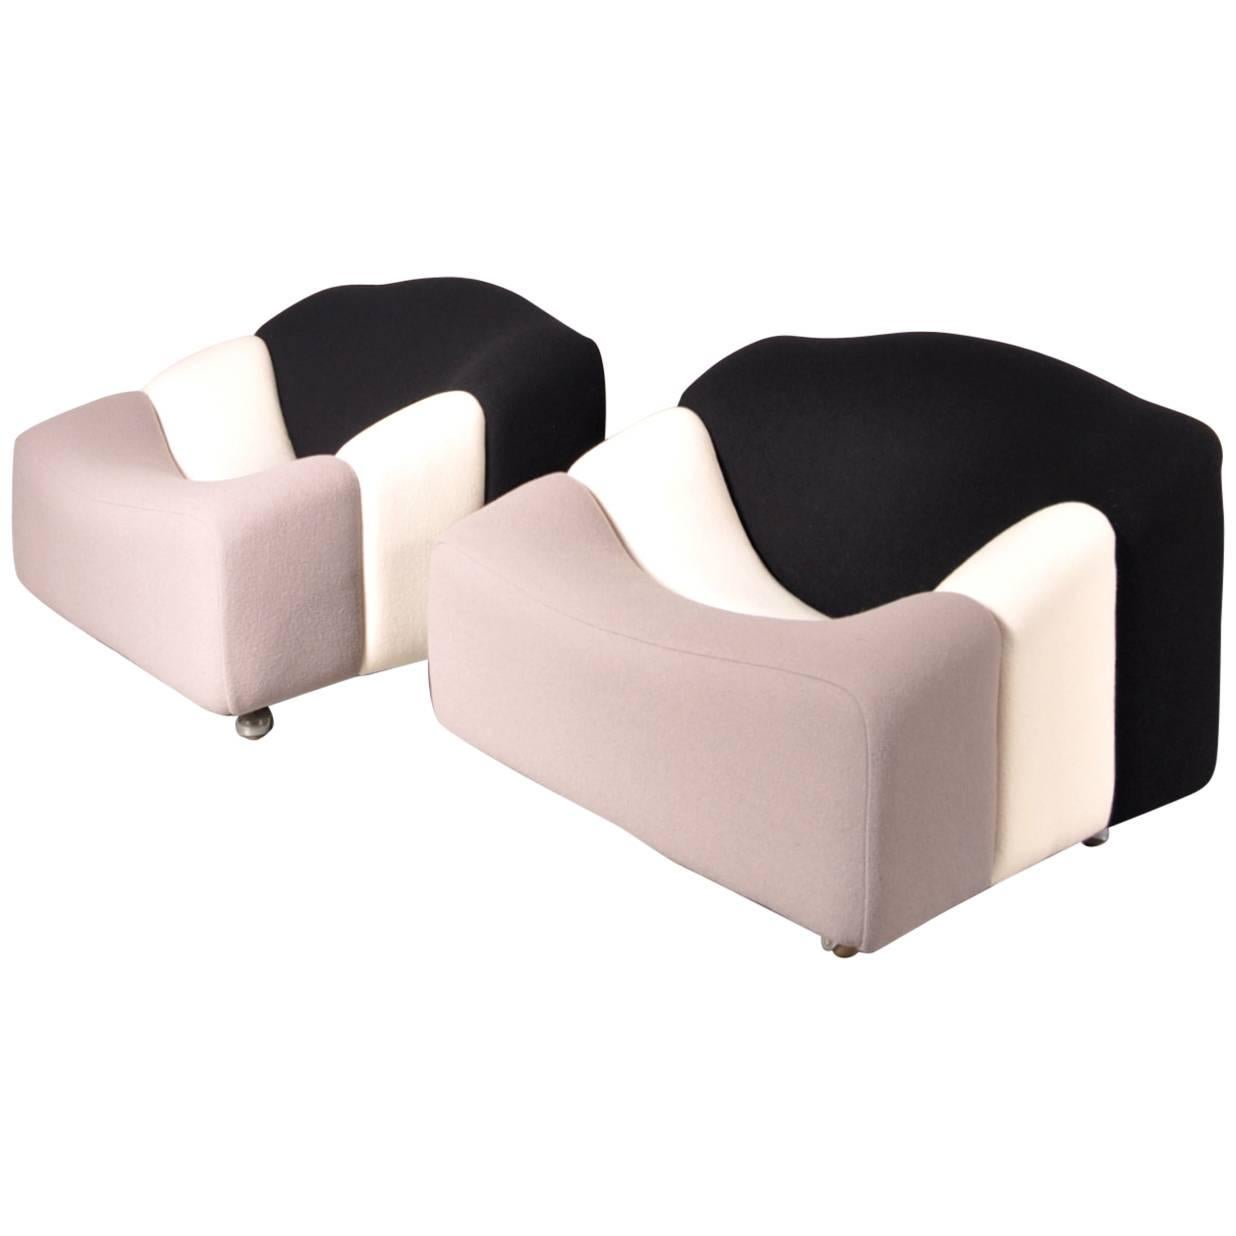 Pair of ABCD Chairs by Pierre Paulin for Artifort, Netherlands, circa 1960